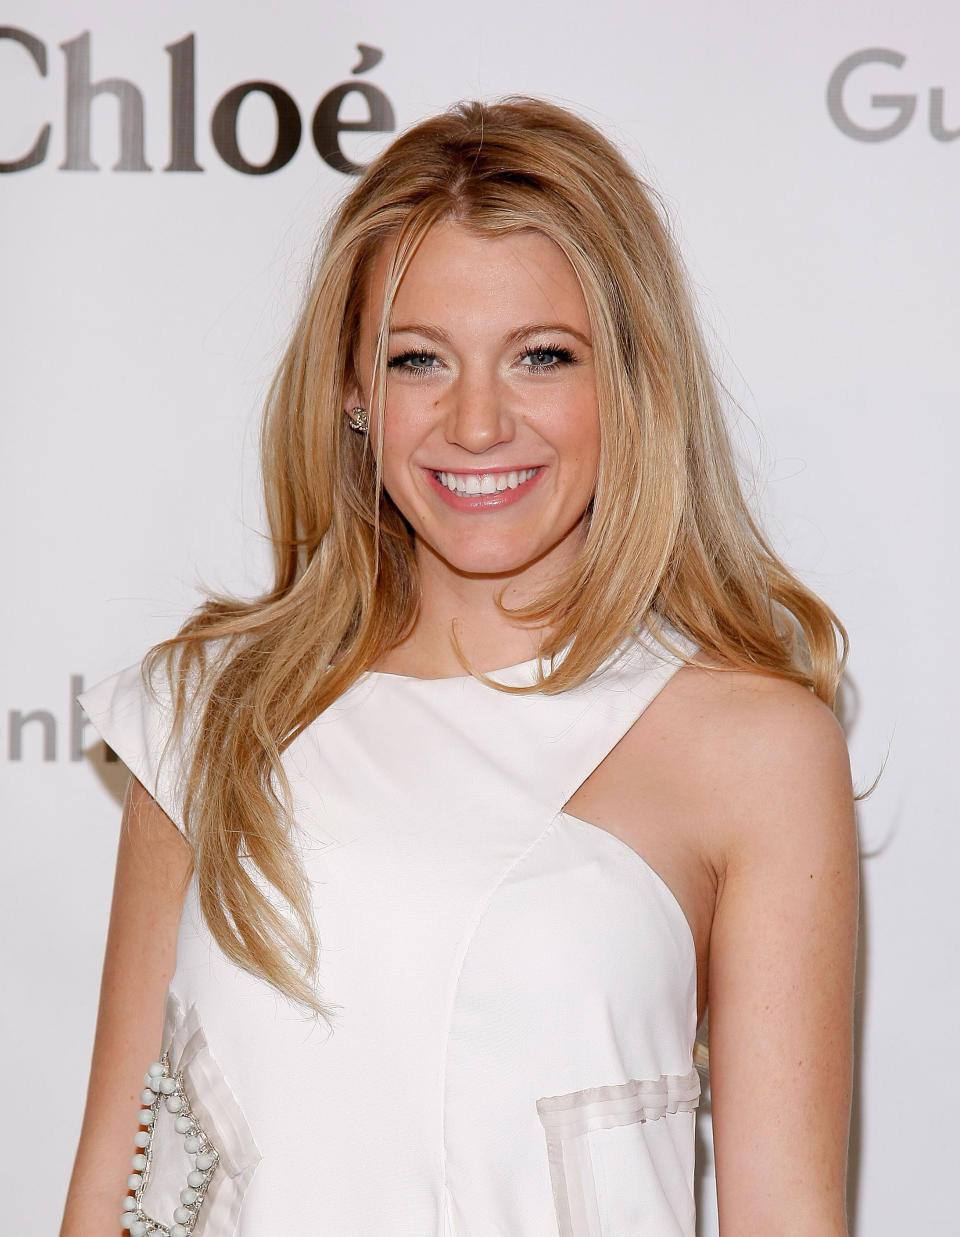 NEW YORK - DECEMBER 13:  Actress Blake Lively   arrives at The Annual Solomon R Guggenheim Young Collectors Council Art Show sponsered by Chloe at the Solomon R Guggenheim Museum on December 13, 2007 in New York City  (Photo by Jemal Countess/WireImage) 